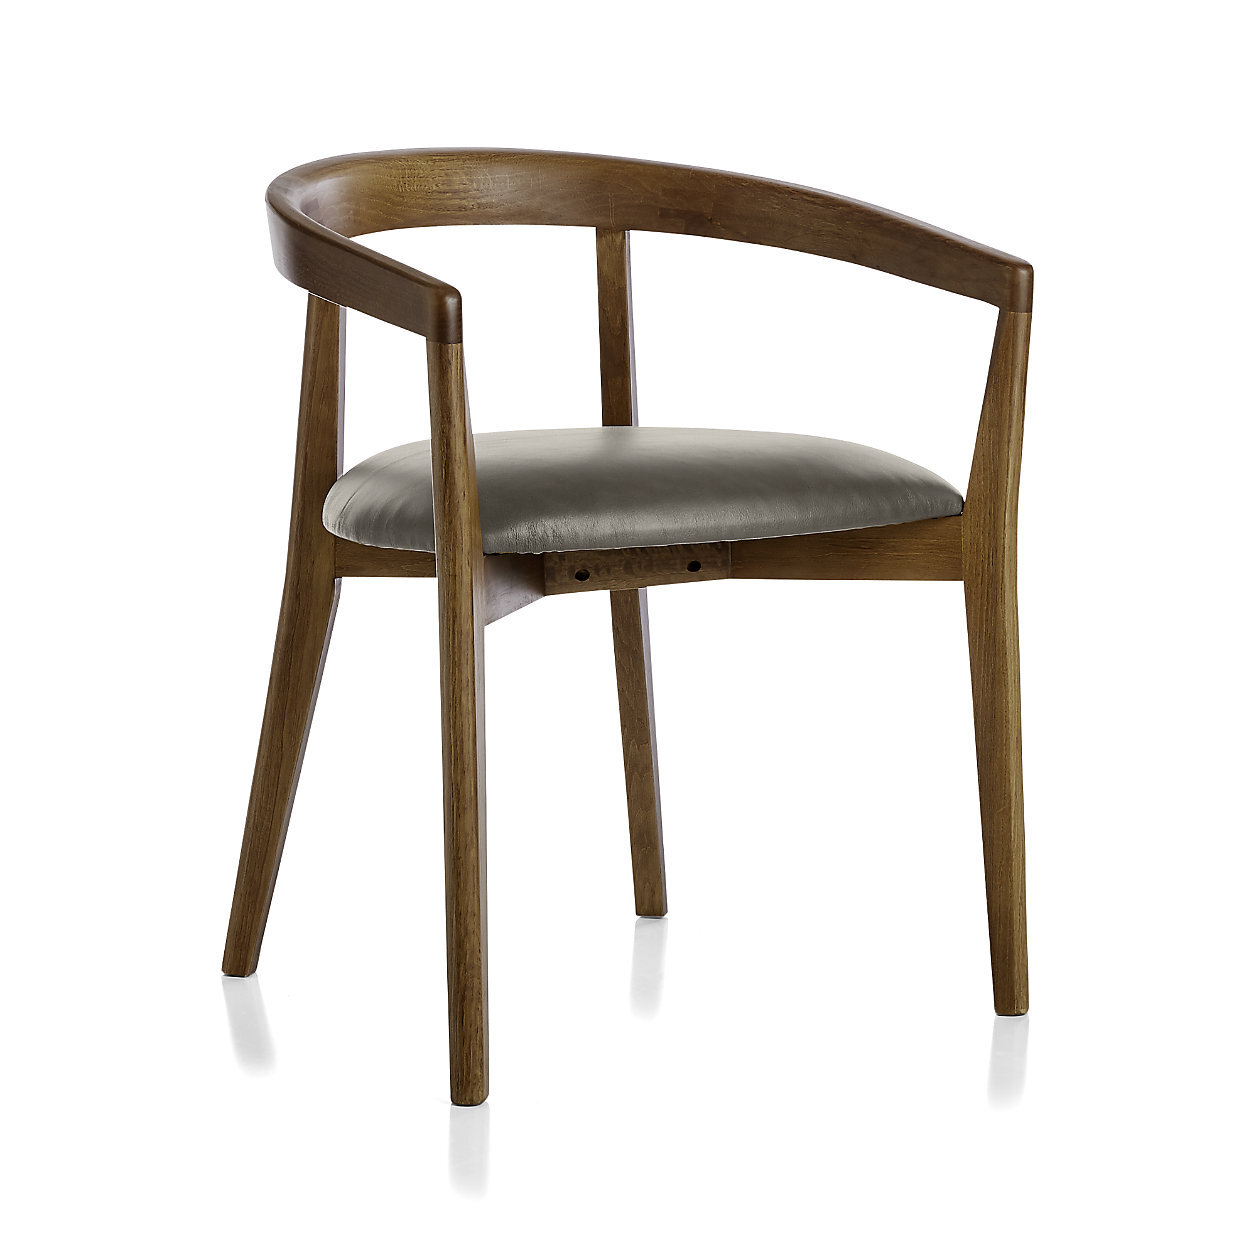 Cullen Shiitake Stone Round Back Dining Chair